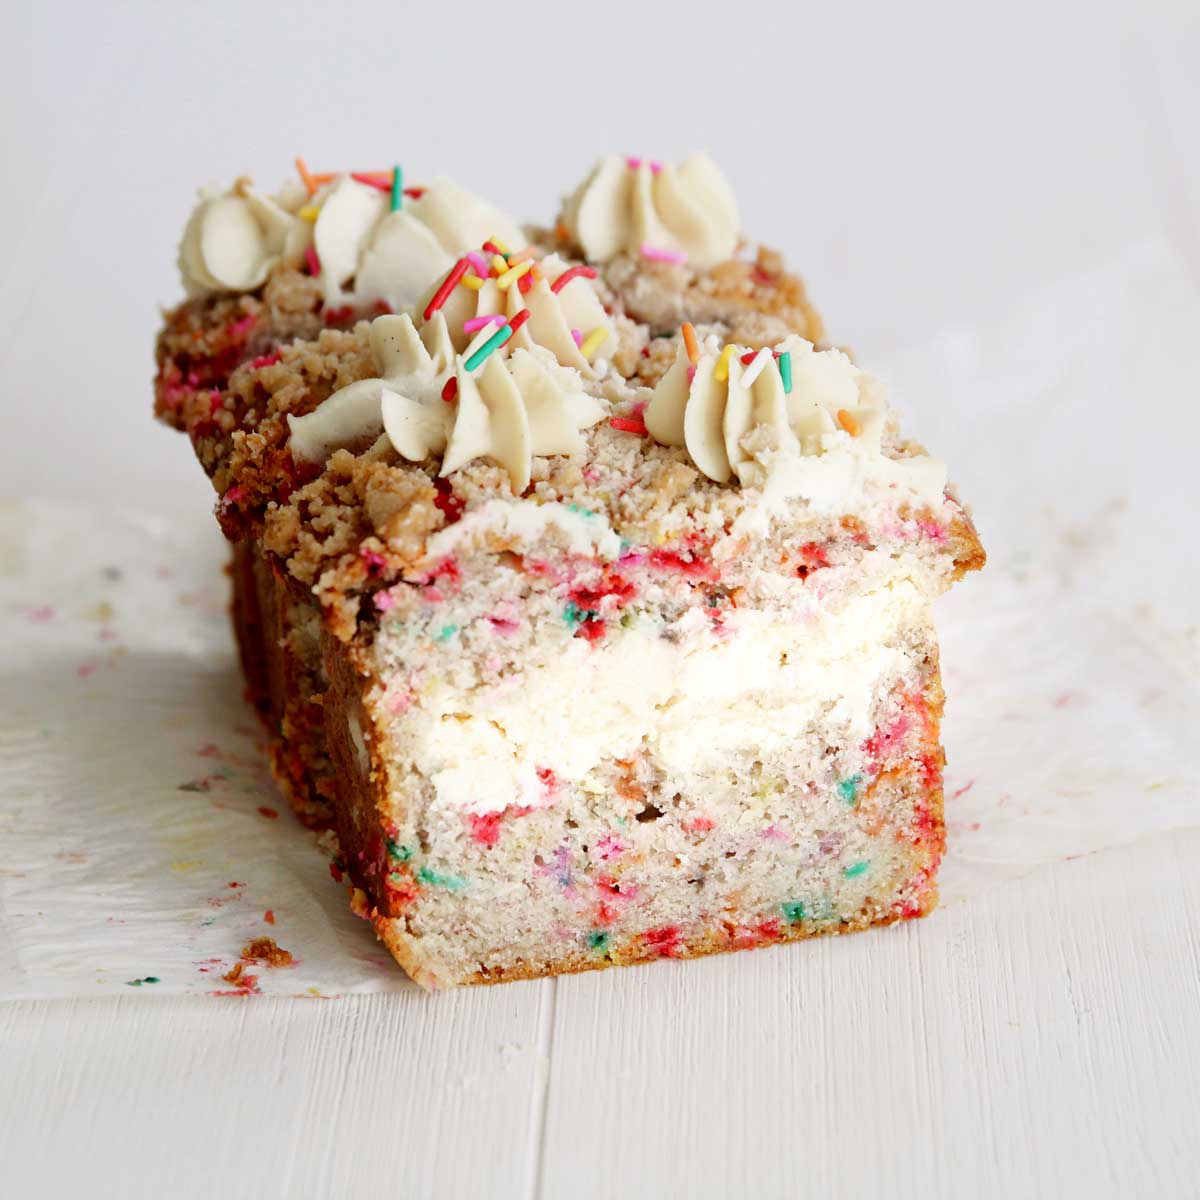 It's Your Birthday Cake Banana Bread with Cream Cheese Filling (No Eggs, No Butter) - Frosting